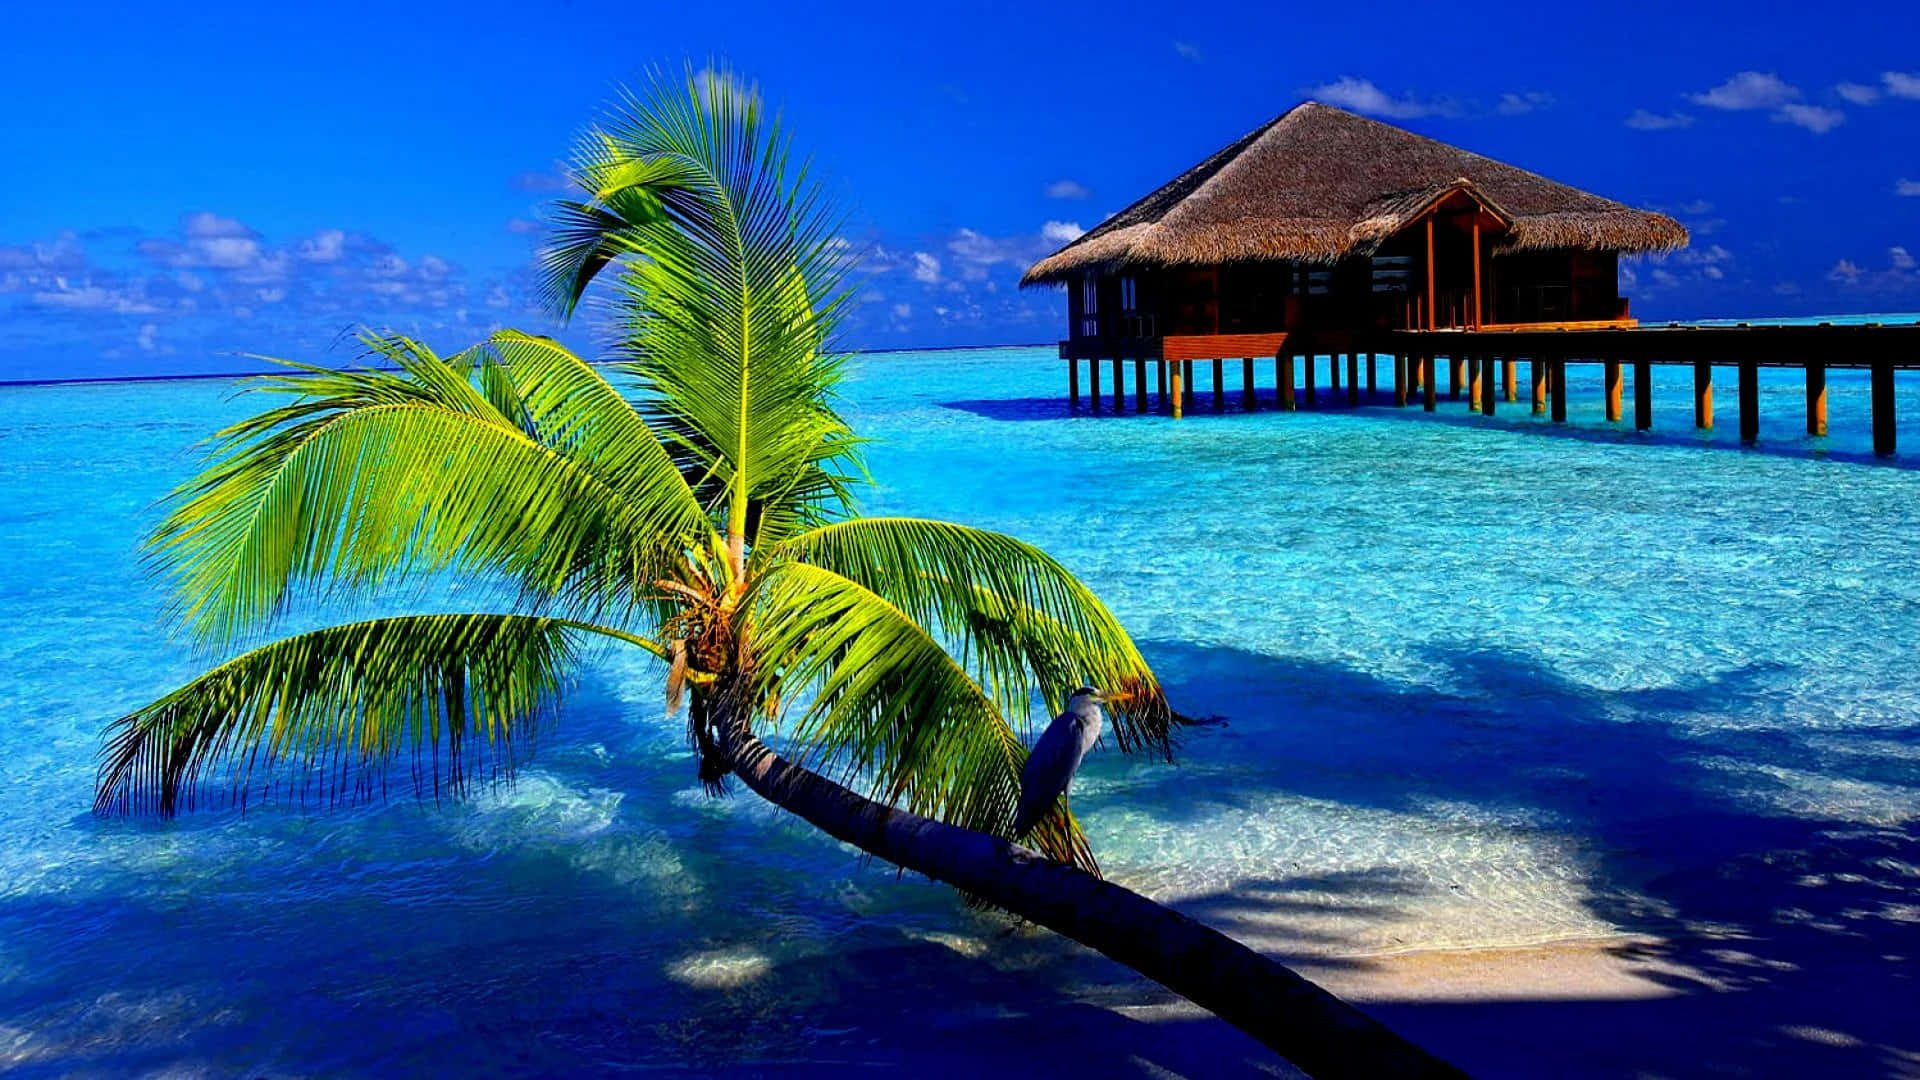 Feel the warmth of a beautiful tropical beach